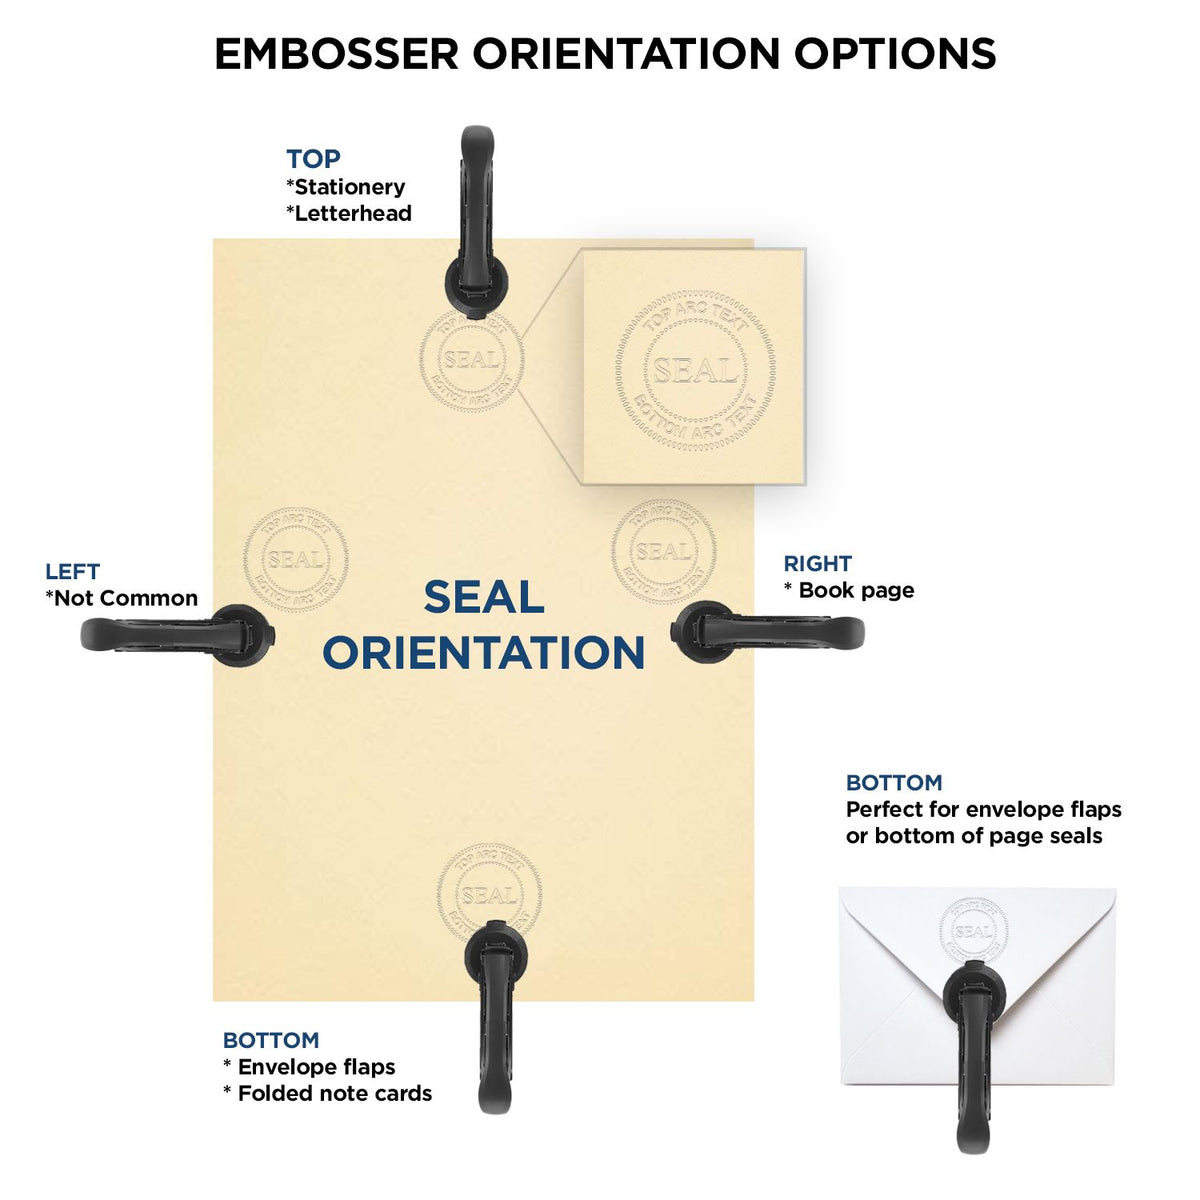 An infographic for the Heavy Duty Cast Iron Nevada Engineer Seal Embosser showing embosser orientation, this is showing examples of a top, bottom, right and left insert.